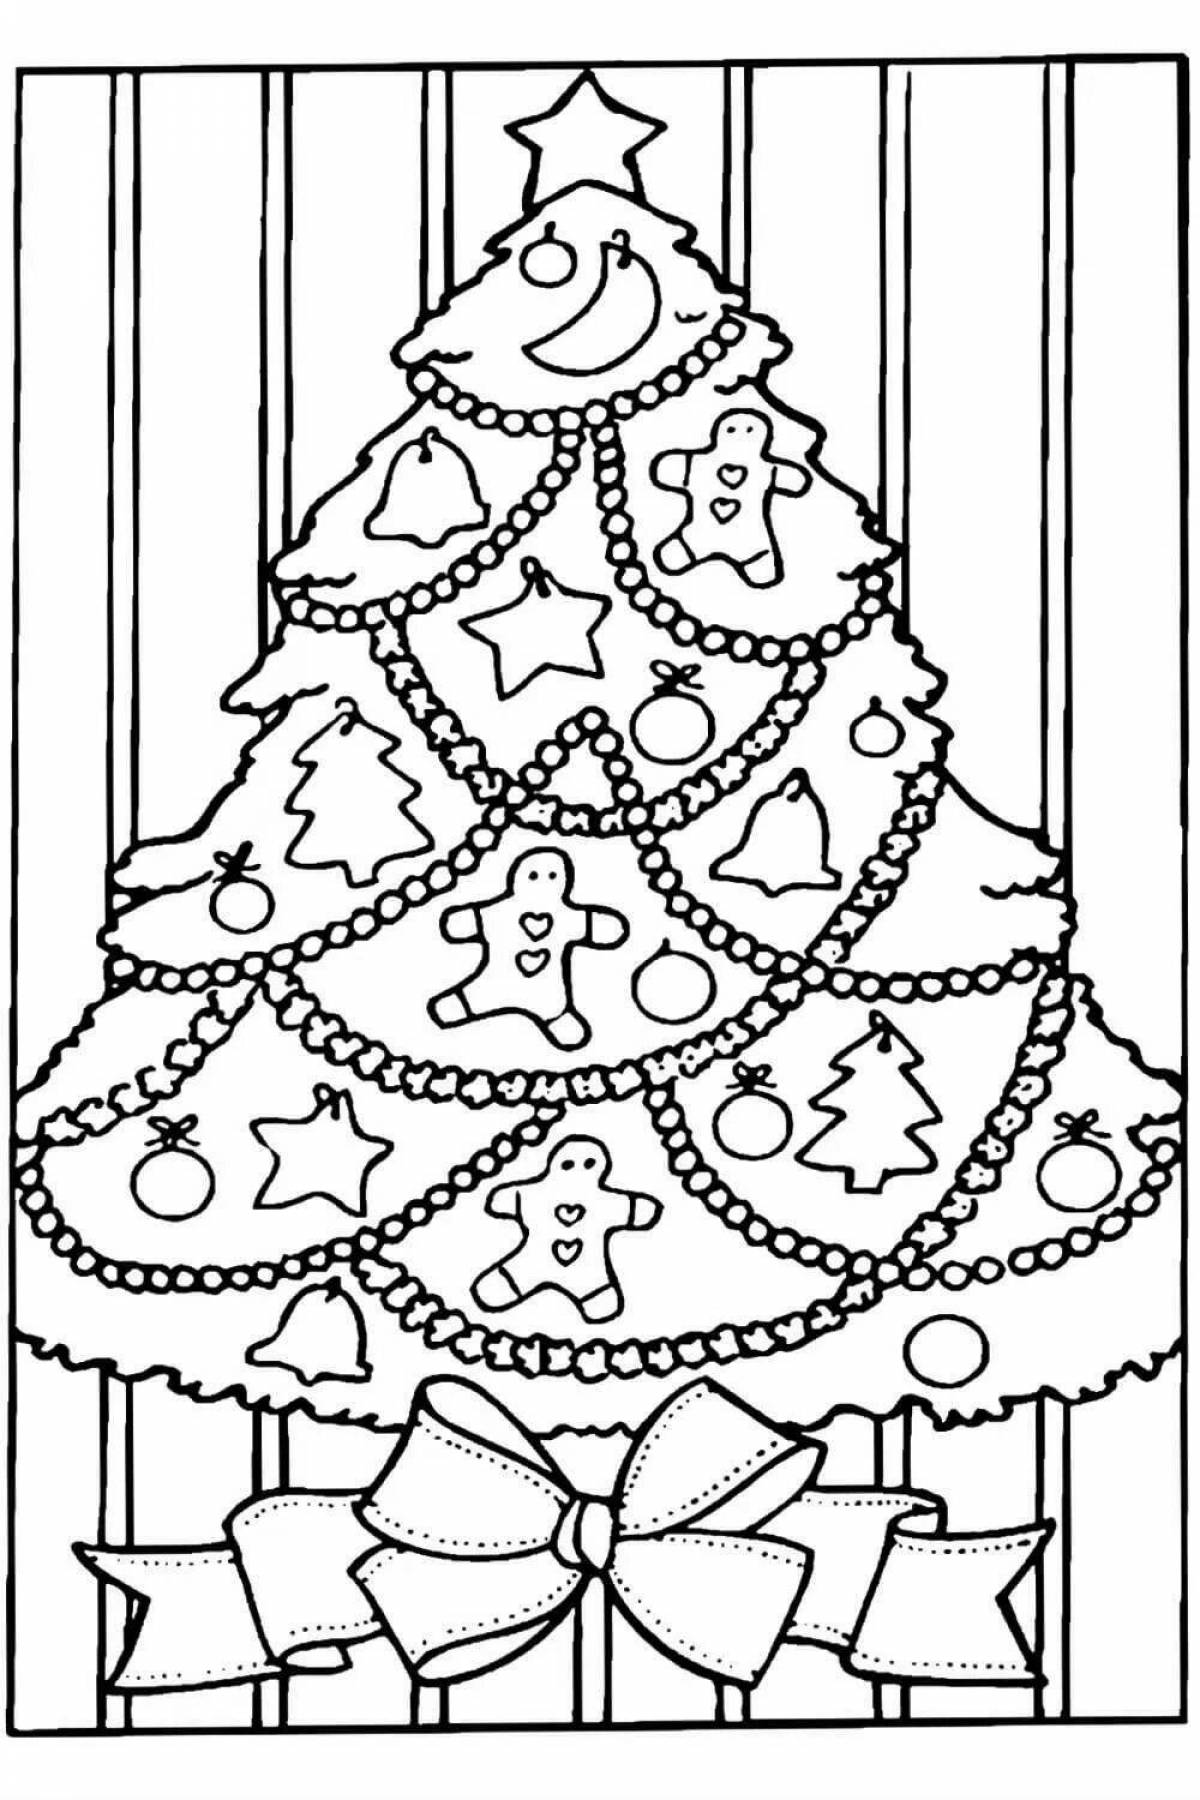 Exquisite Christmas tree coloring